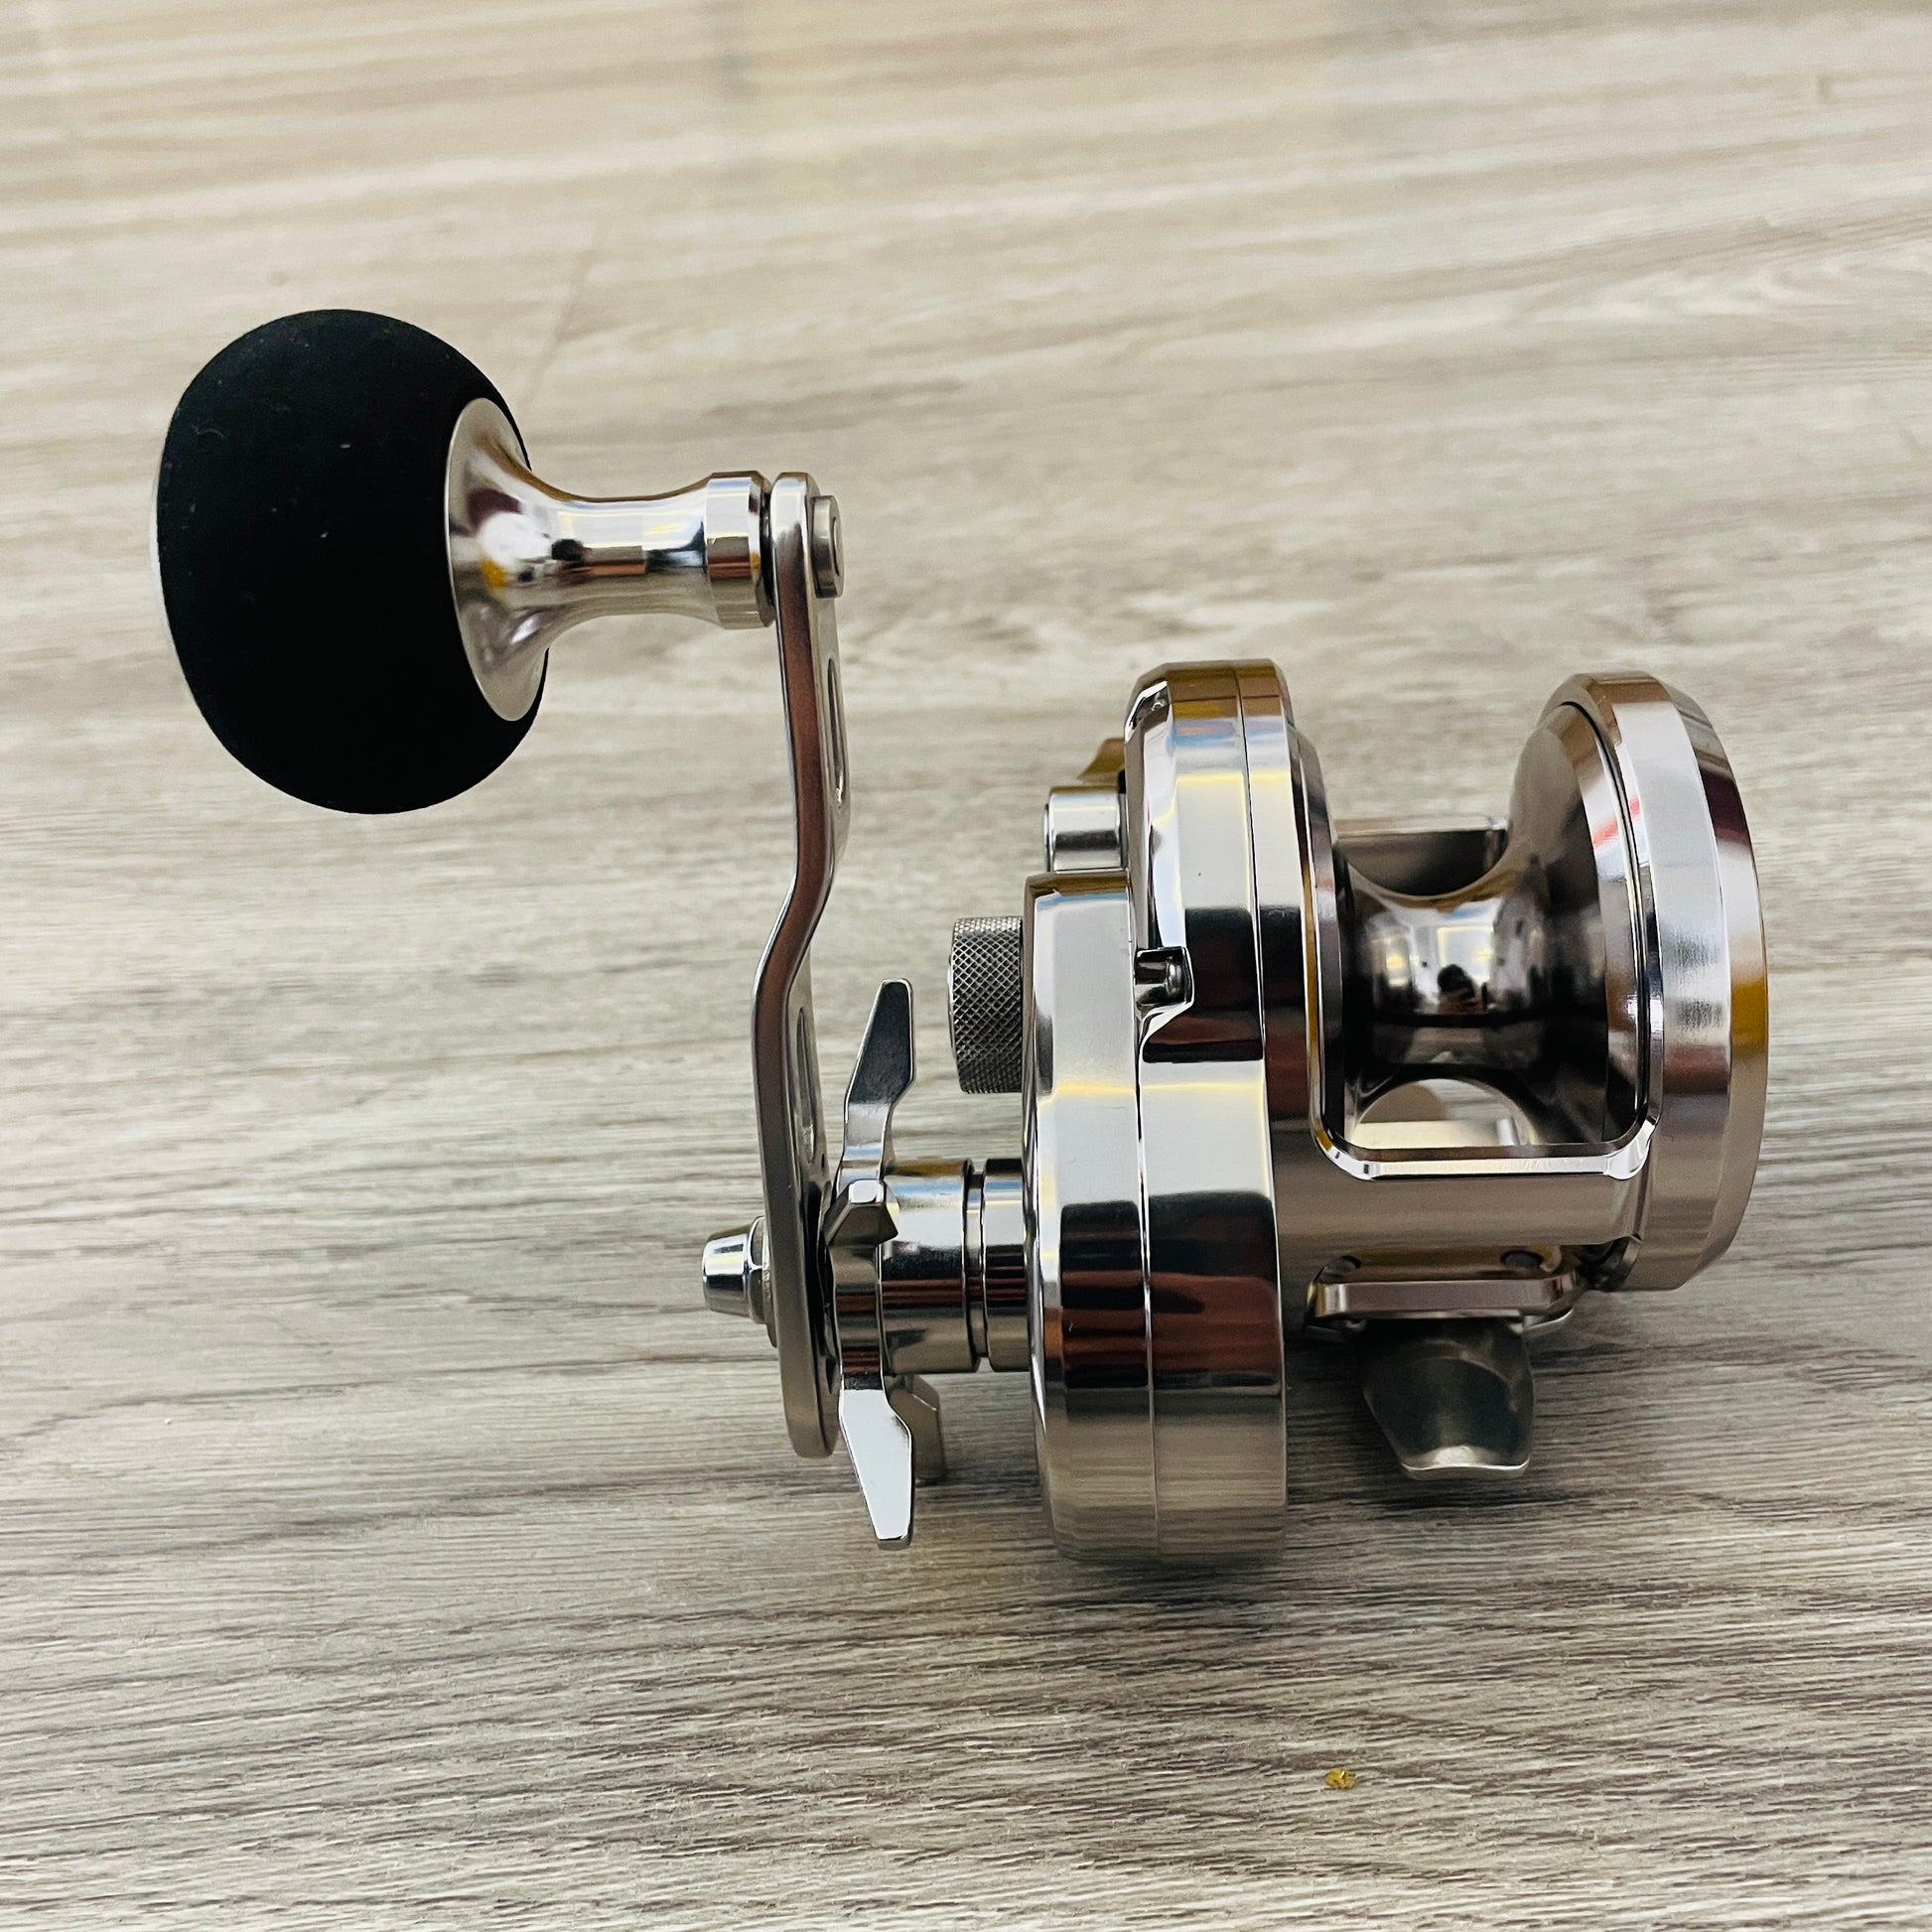 NOEBY Jigging Fishing reel 1500/2500 (left and right hand) – Jigs